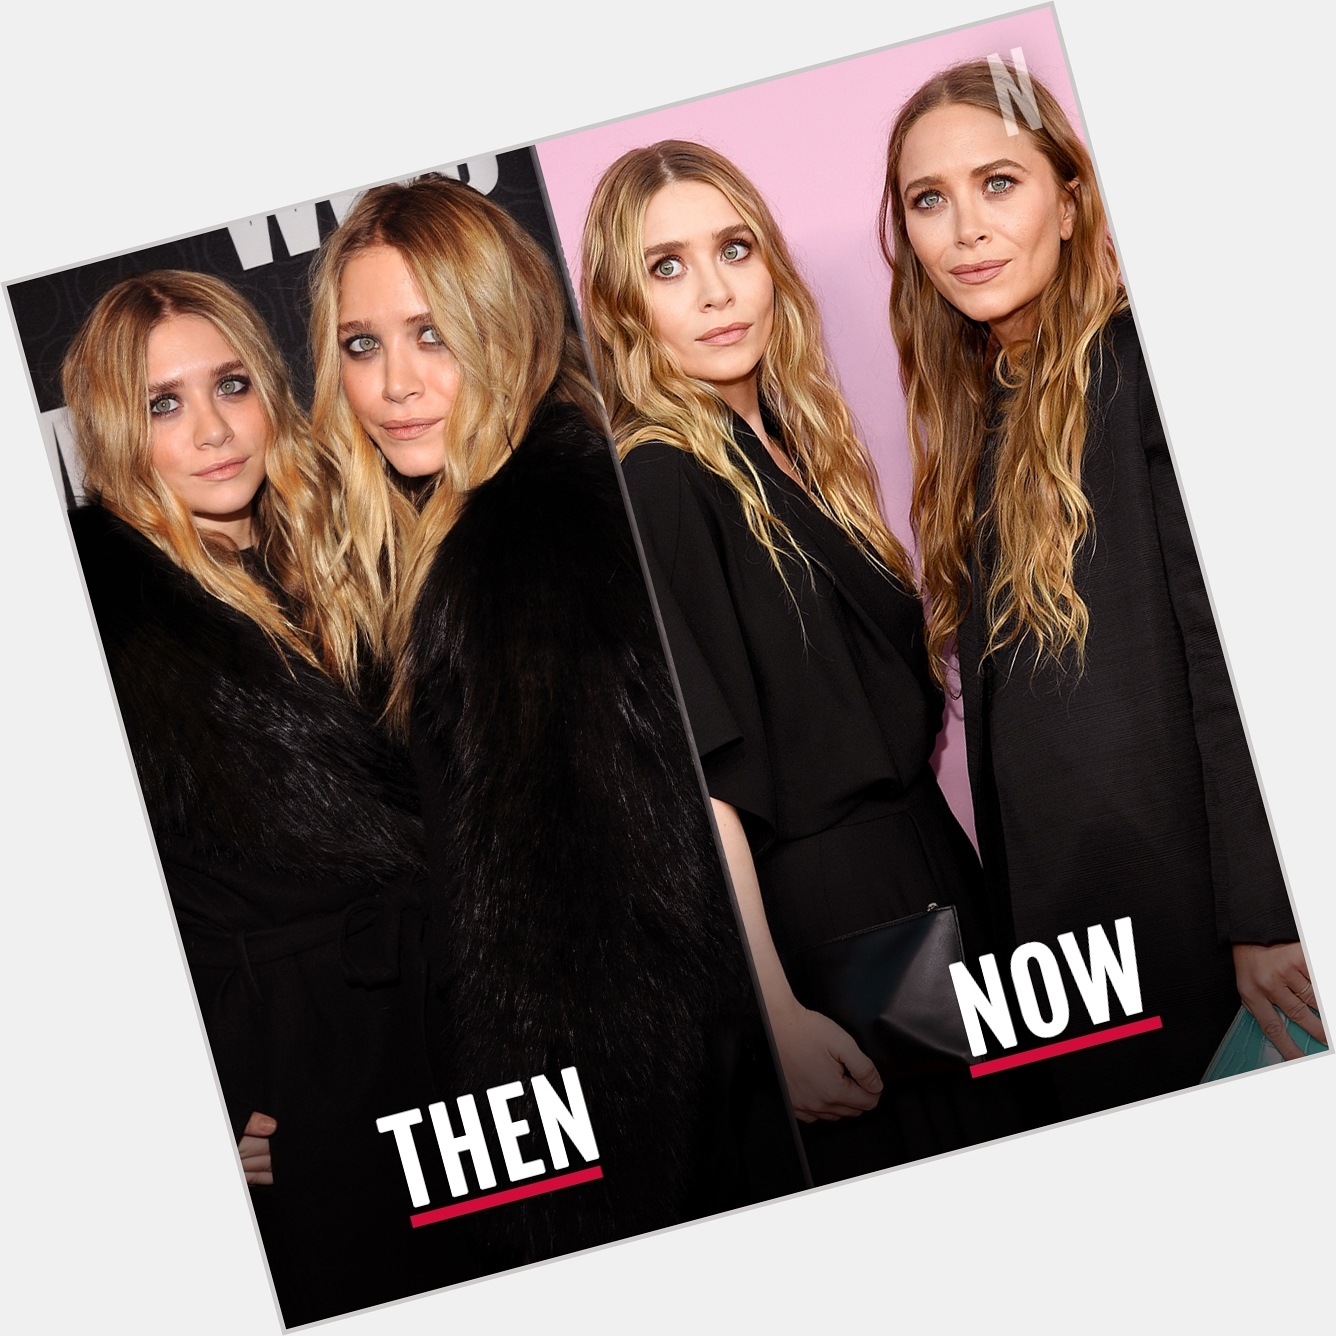 The Sisters: In Their Teens and Now Happy birthday to Mary-Kate and Ashley Olsen! 